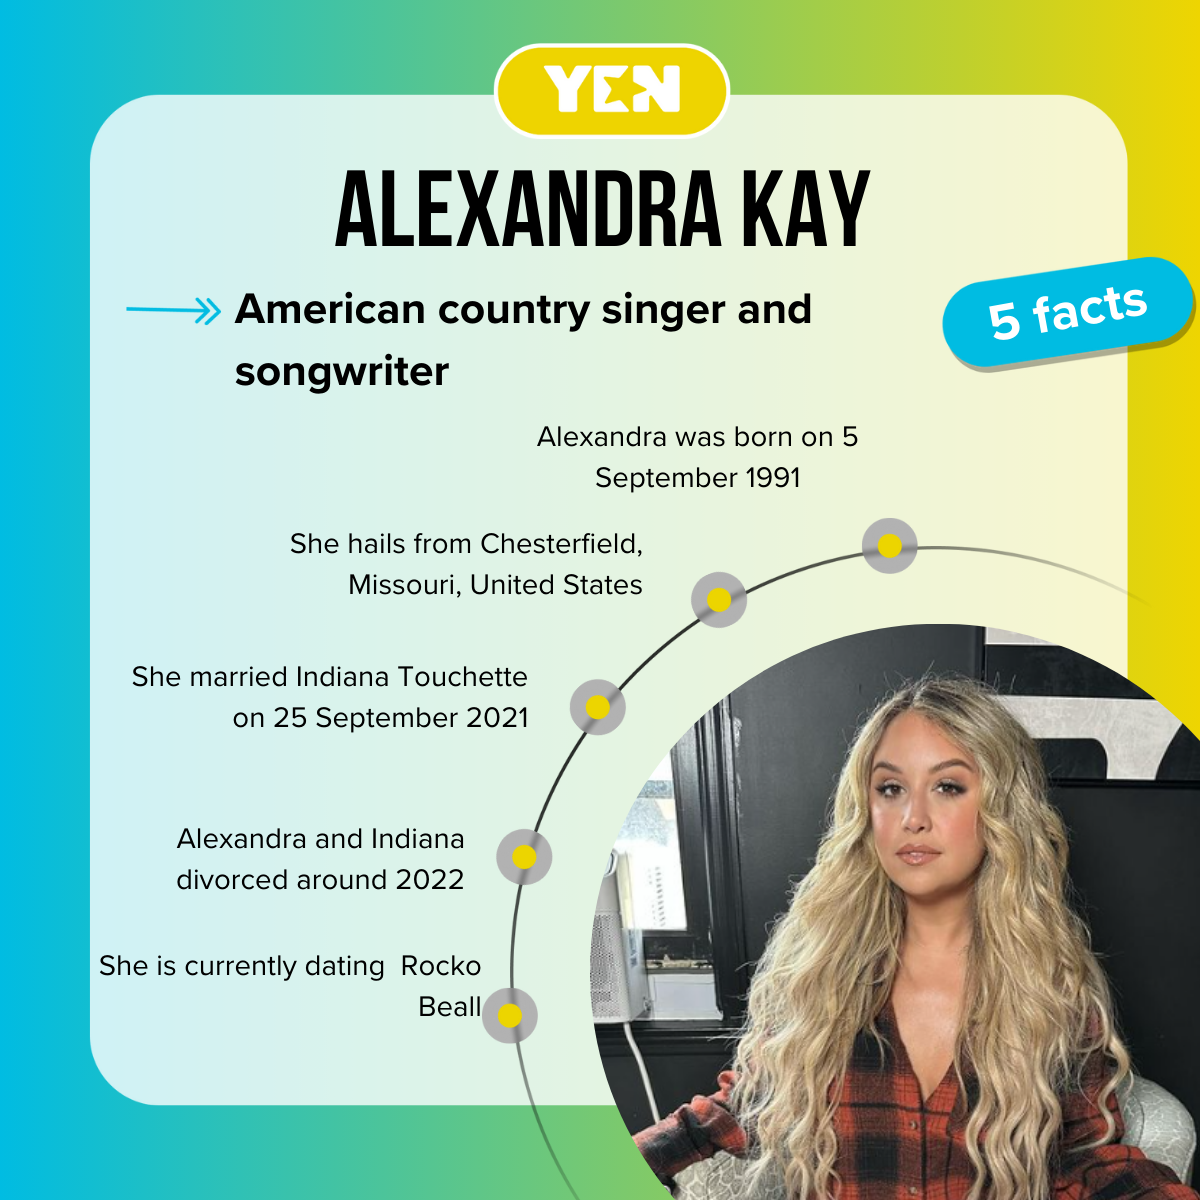 Facts about Alexandra Kay